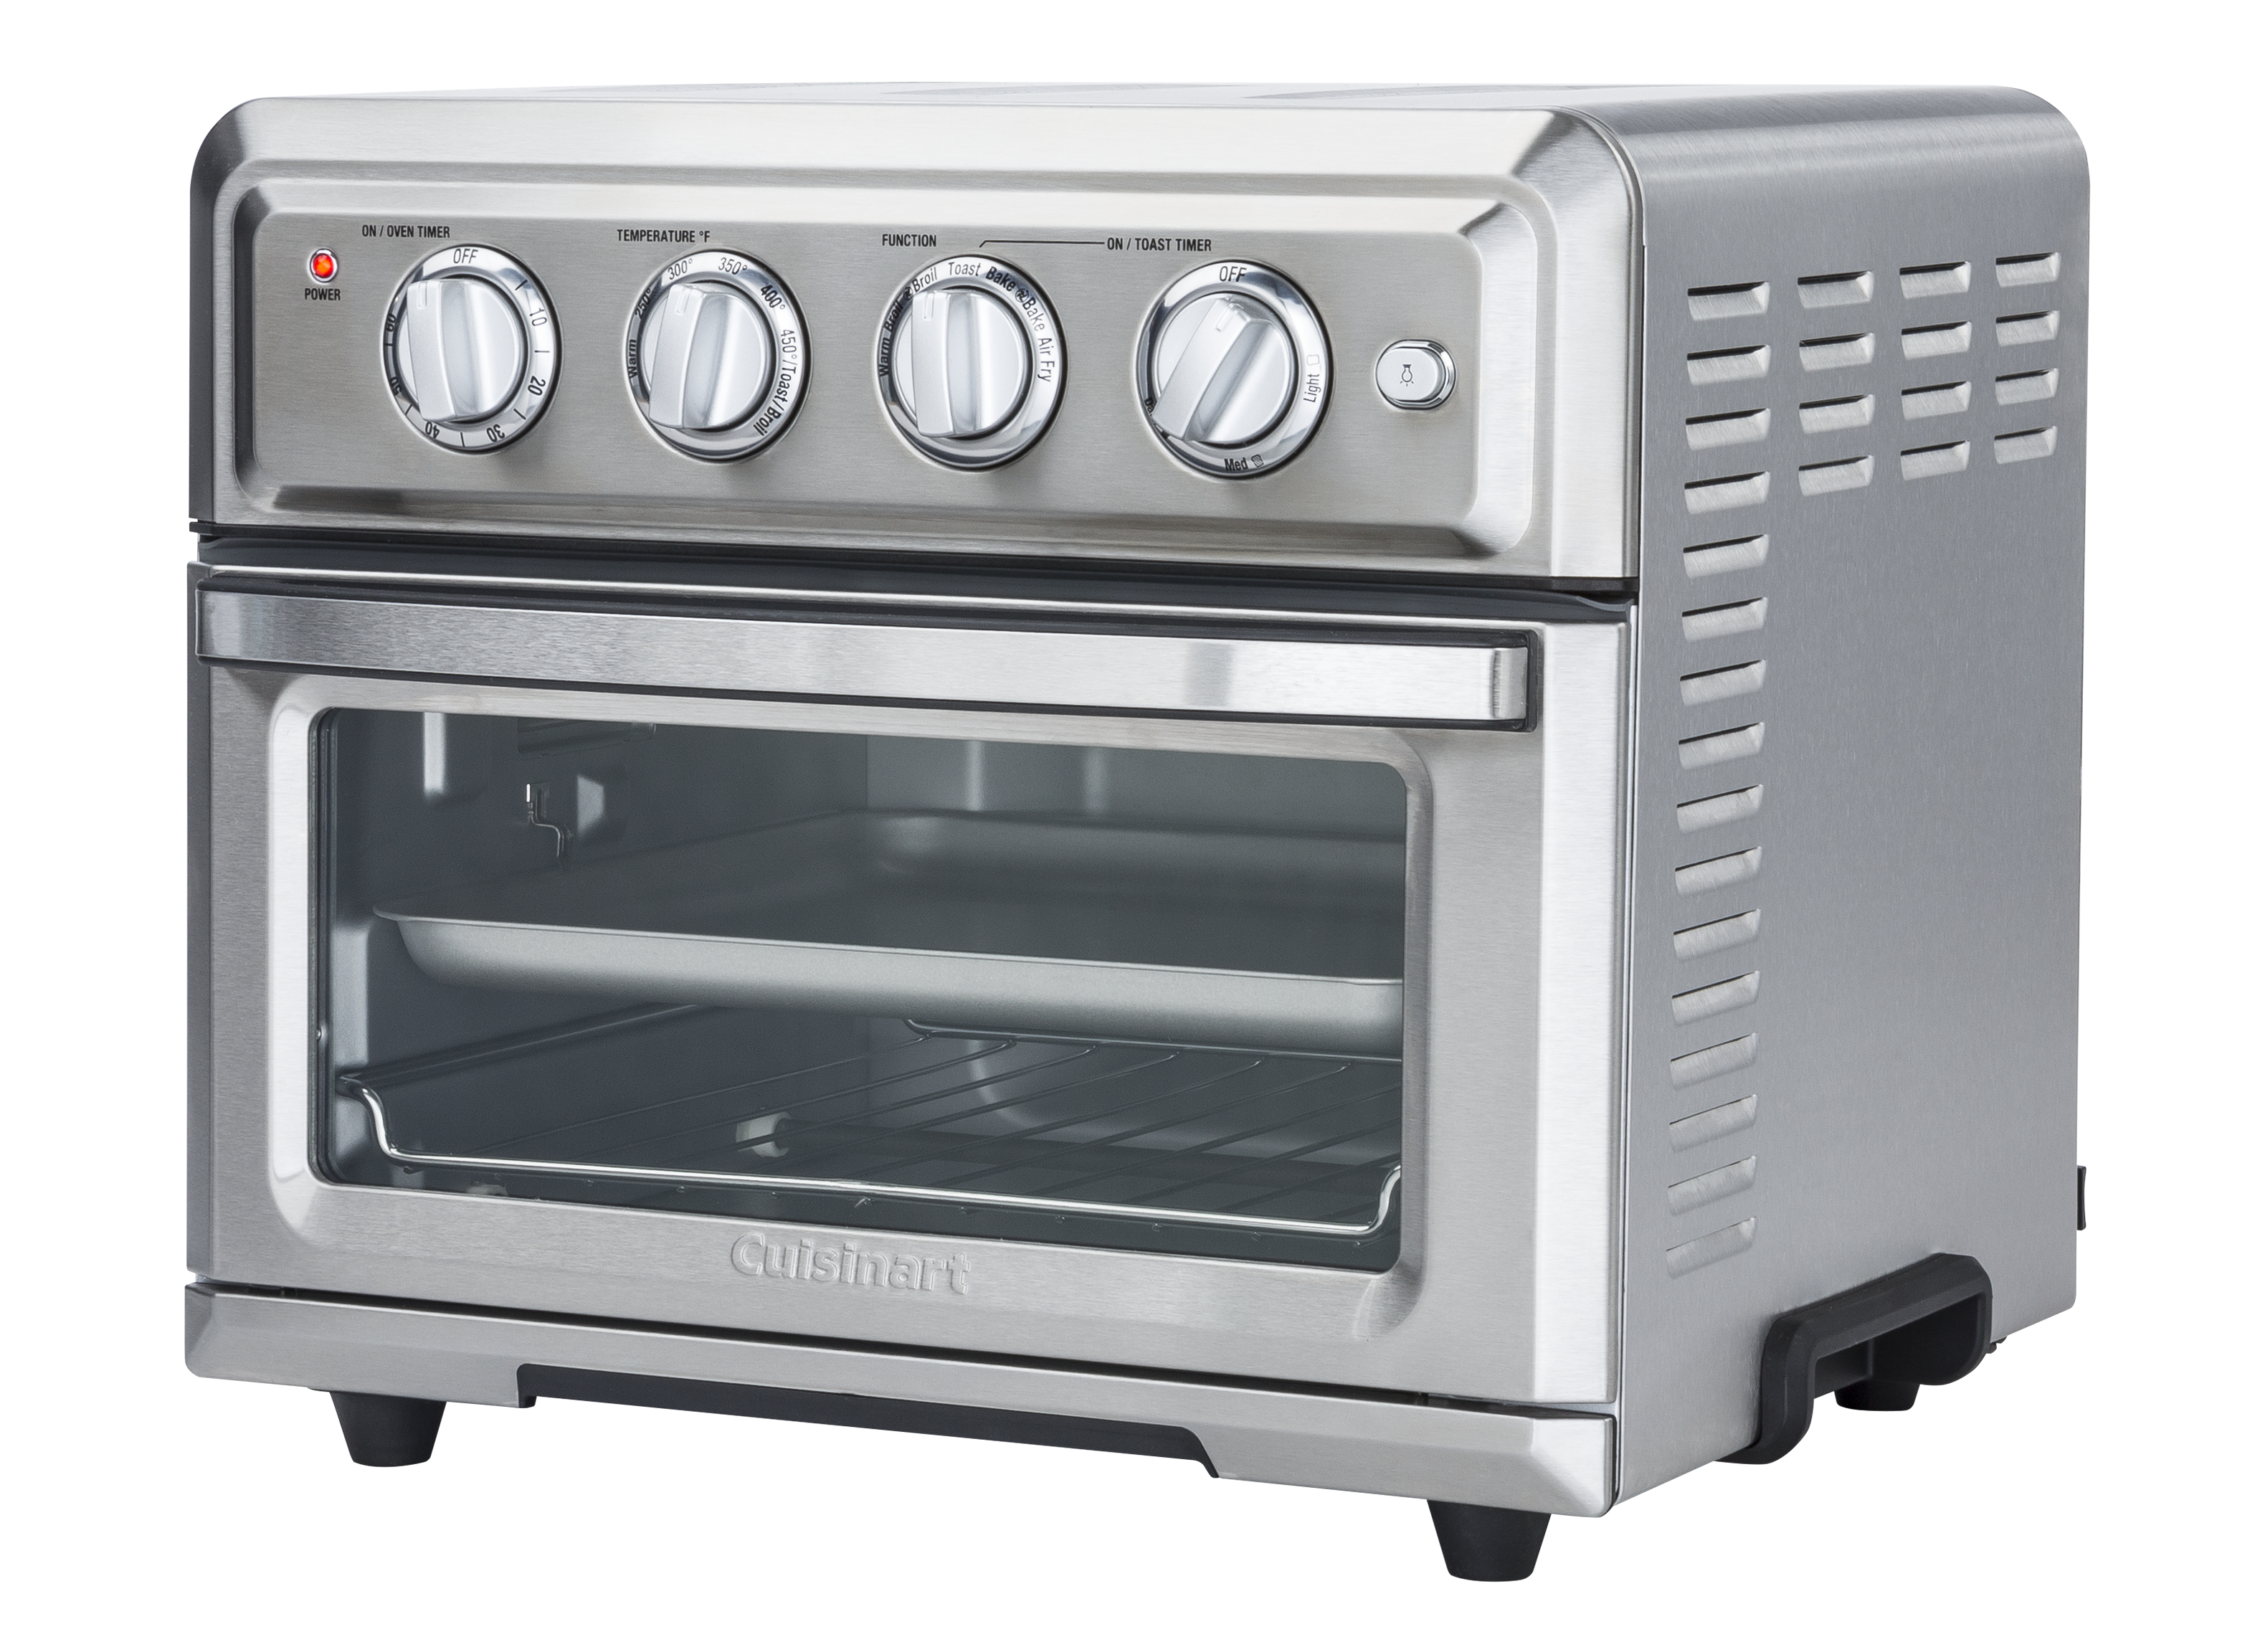 https://crdms.images.consumerreports.org/prod/products/cr/models/389603-toasterovens-cuisinart-toa60.png